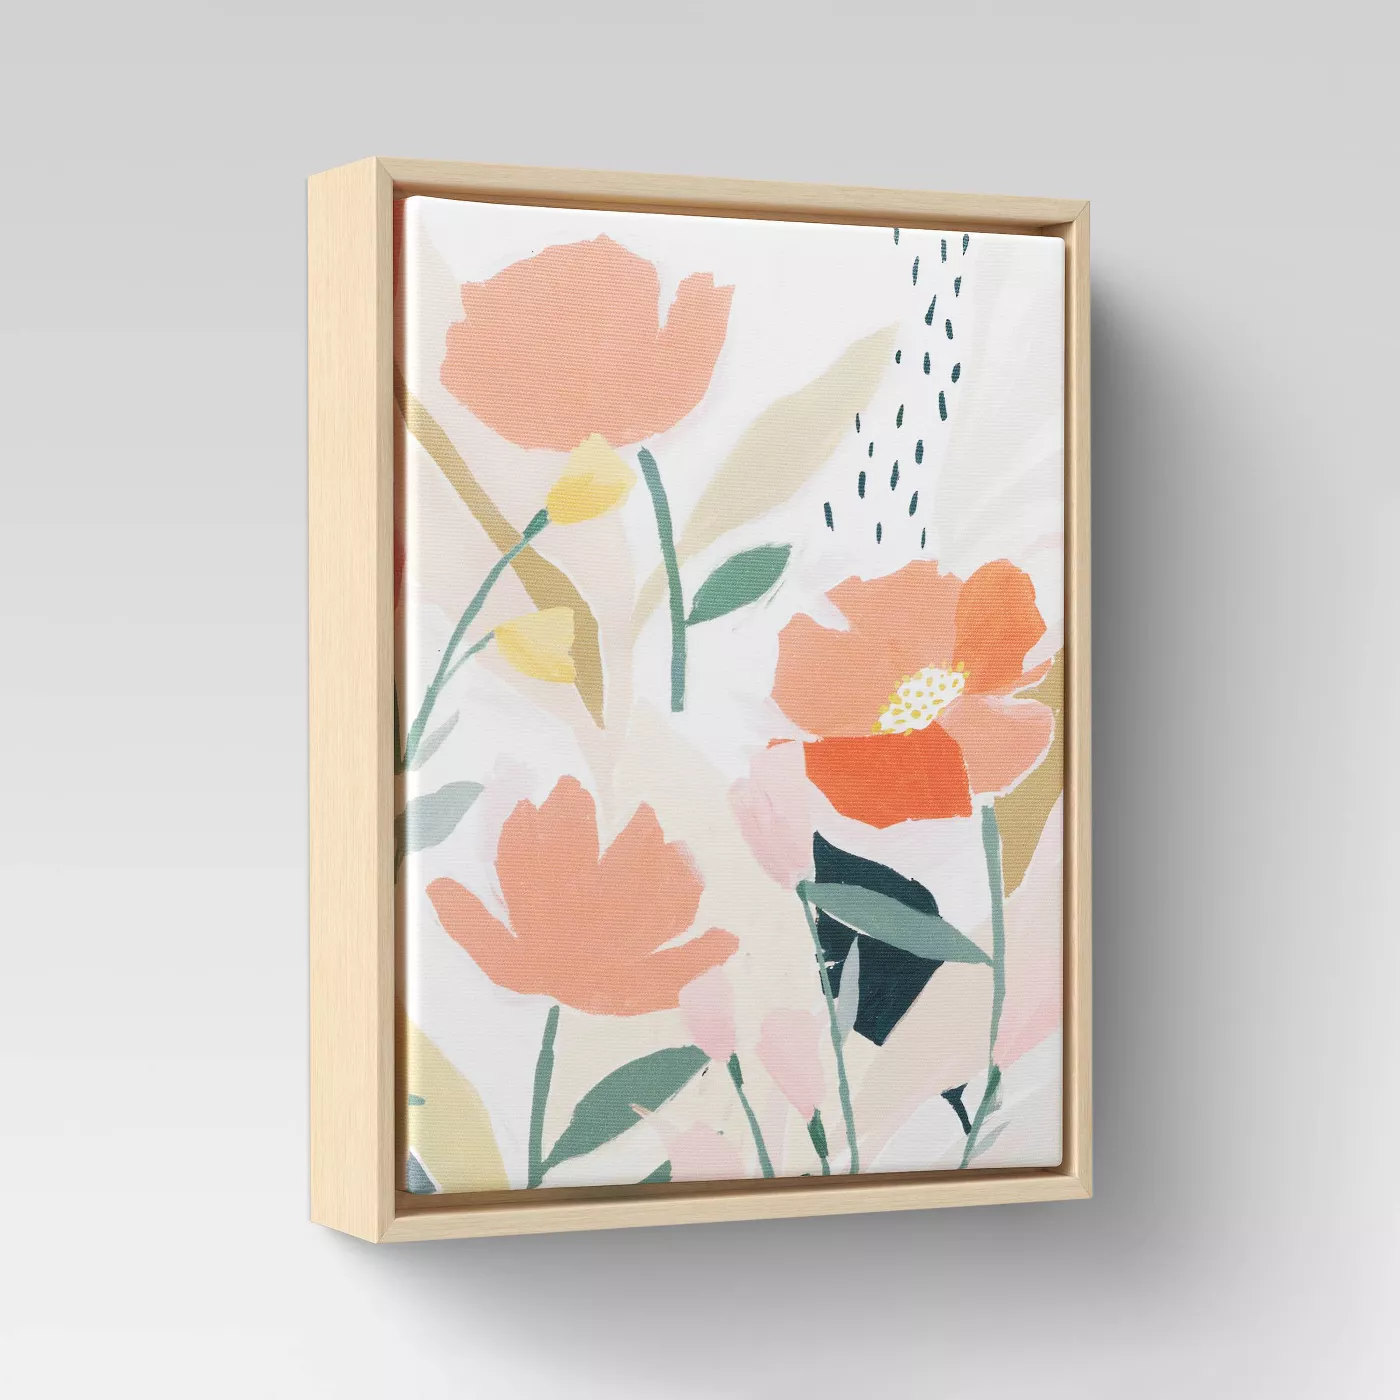 Floral Canvas Pink - Opalhouse™ - image 3 of 4